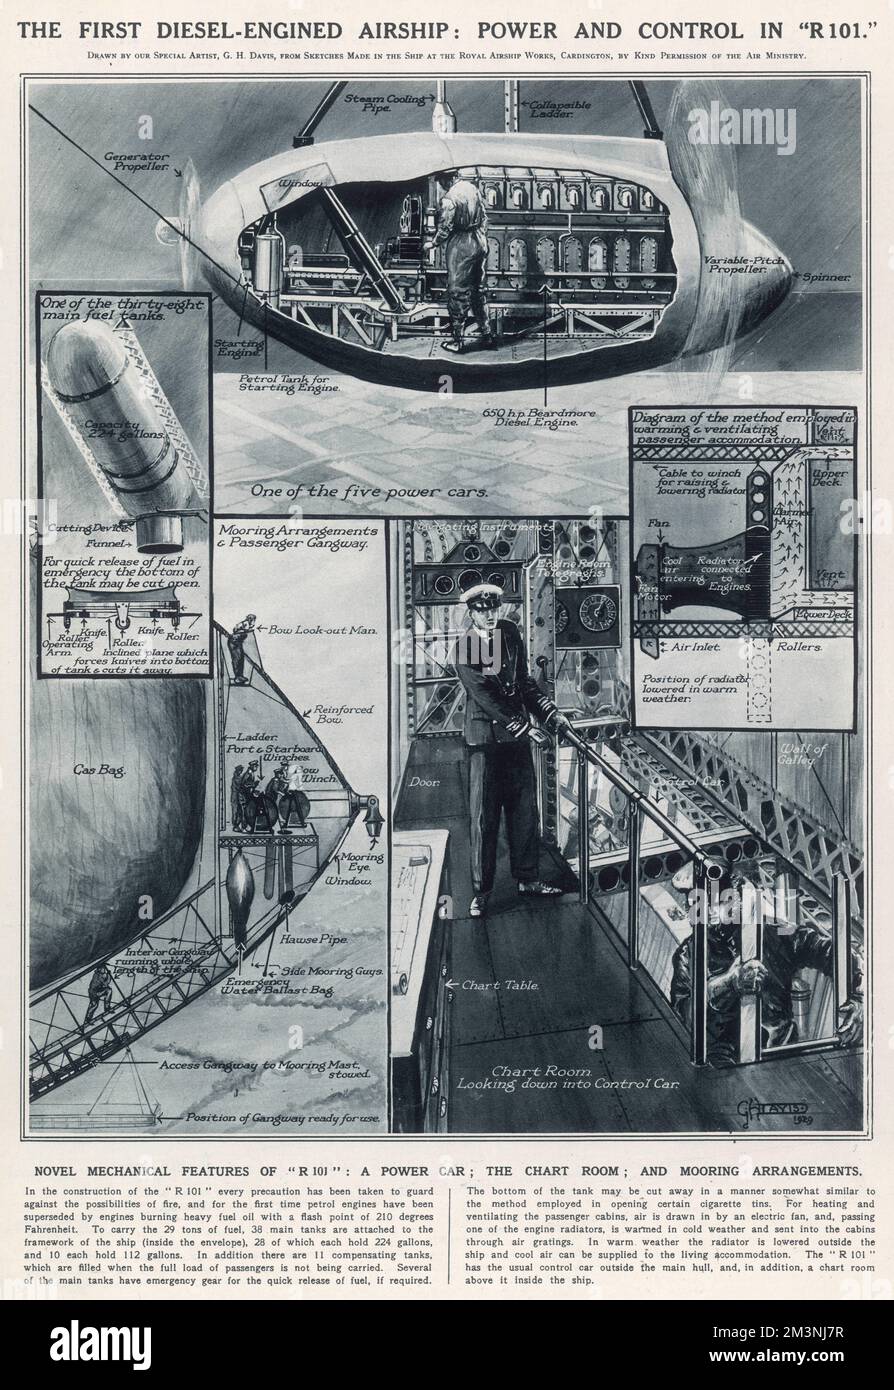 The first diesel-engined airship: power and control in R101. Illustrations of some of the features of R101: a power car, the chart room, and mooring arrangements. The Illustrated London News states that &quot;every precaution has been taken to guard against the possibilities of fire, and for the first time petrol engines have been superseded by engines burning heavy fuel oil&quot; [diesel] which is less flammable. However this did not stop the R101 from crashing near Beauvais, France, on its maiden voyage and bursting into flames, killing 48.     Date: 1929 Stock Photo